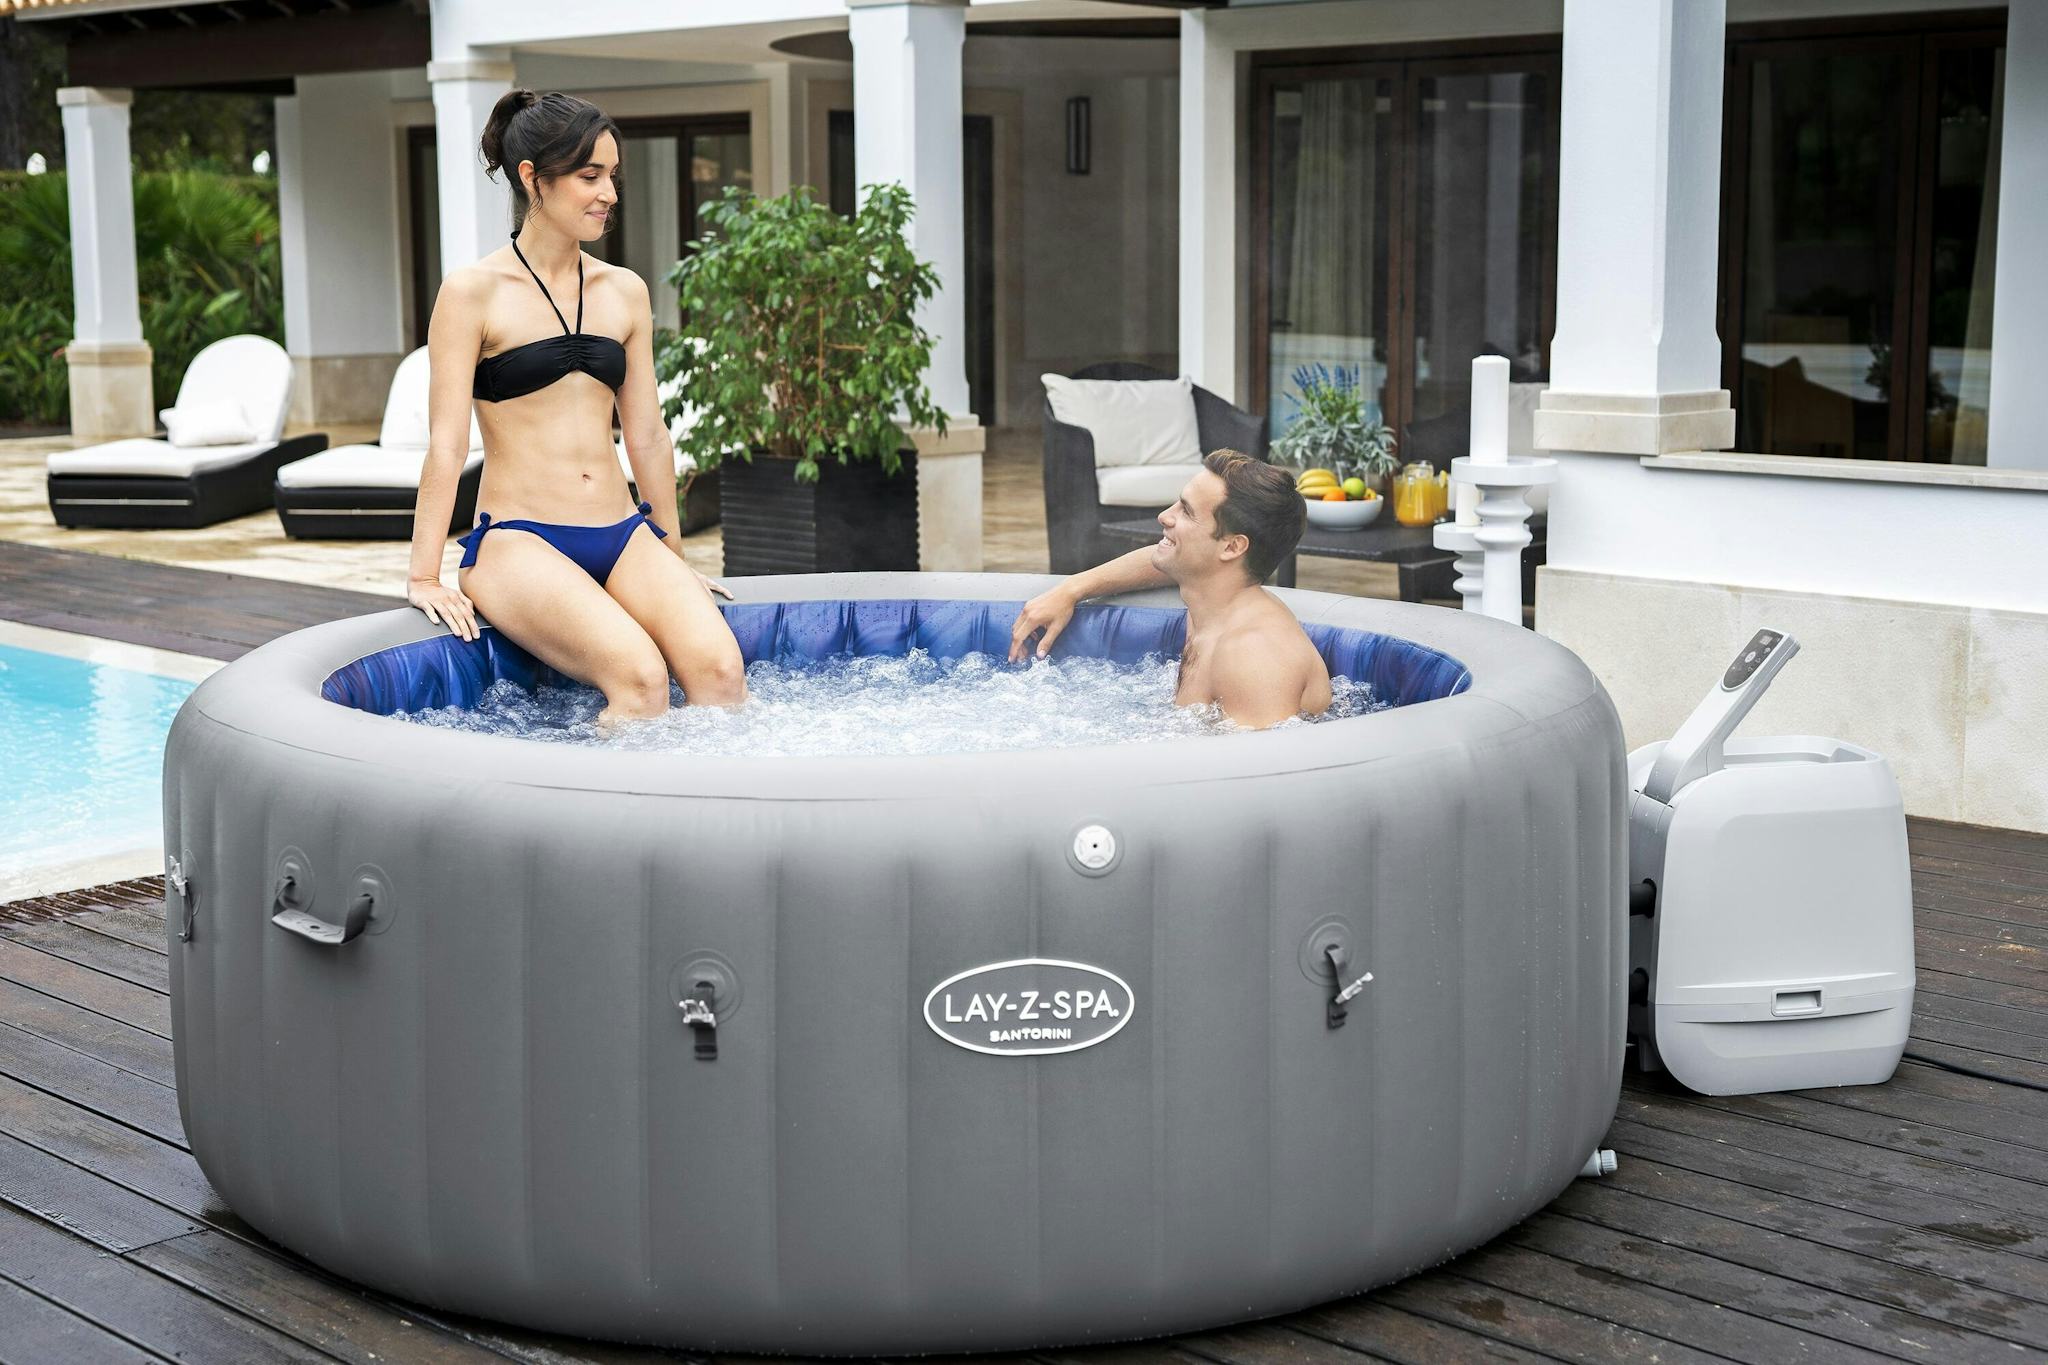 Spas Gonflables Spa gonflable rond Lay-Z-Spa Santorini Hydrojet pro™ 5 - 7 personnes Wifi Bestway 16